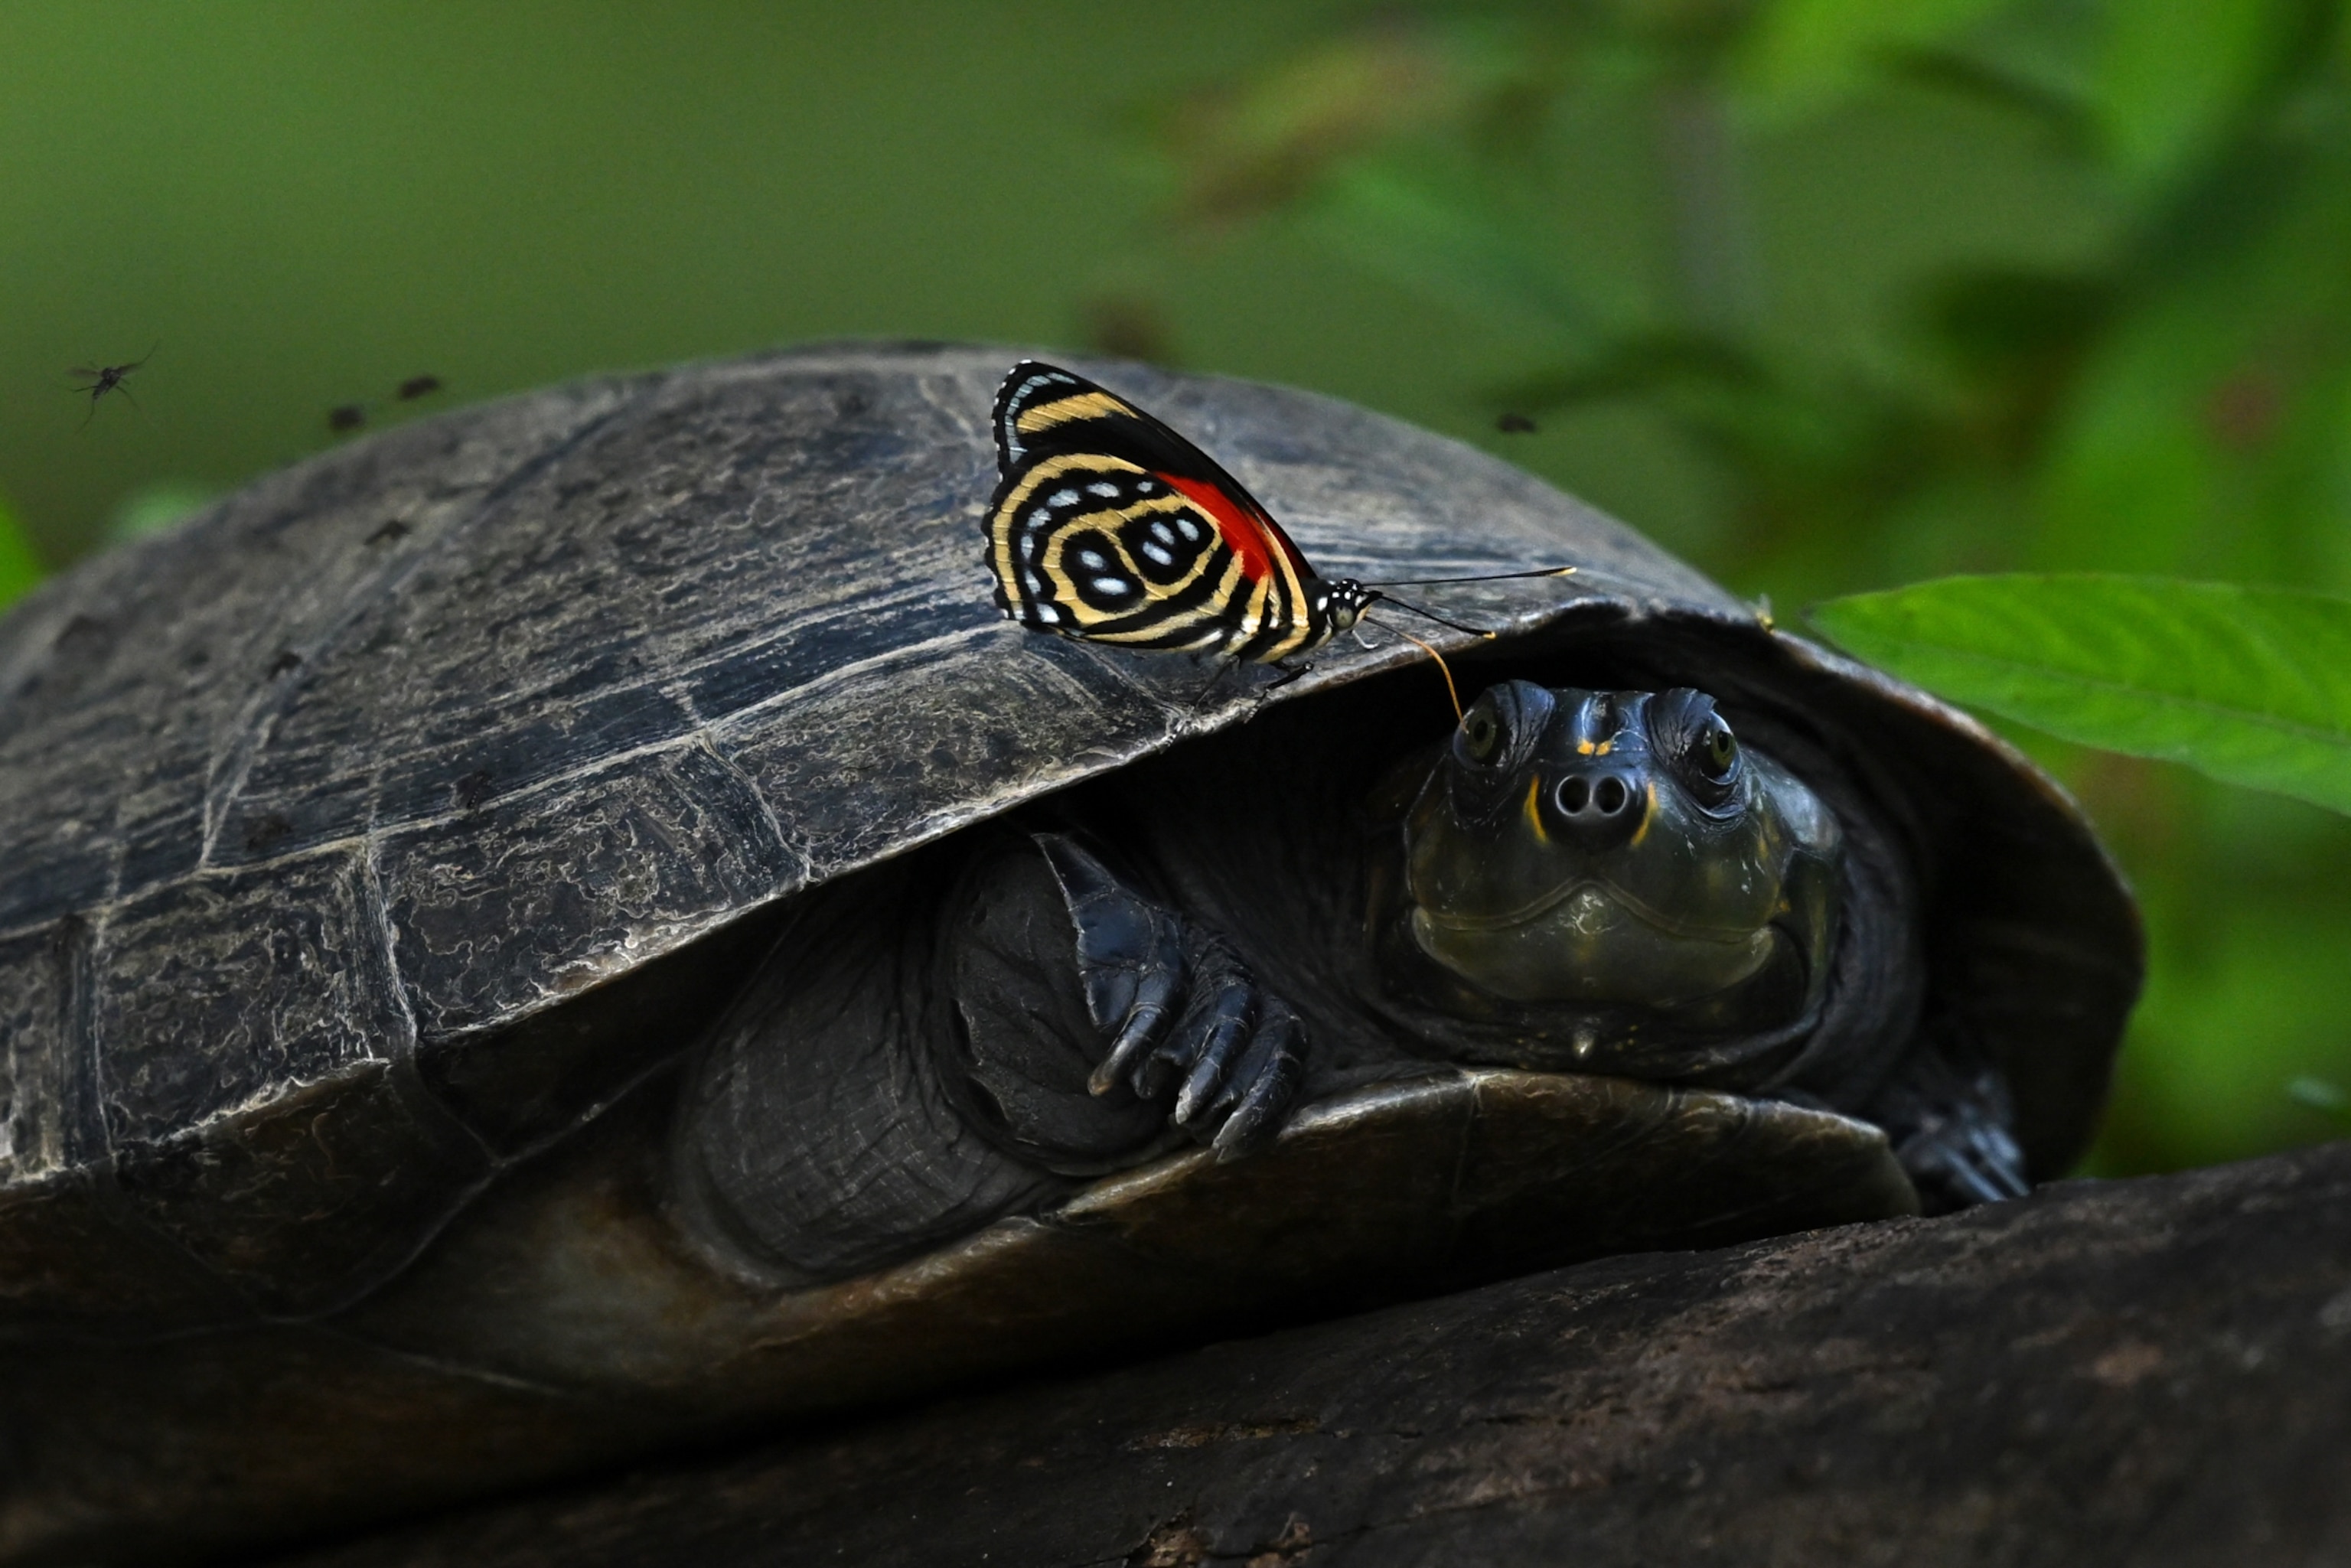 A yellow-spotted river turtle with a butterfly perched on its shell